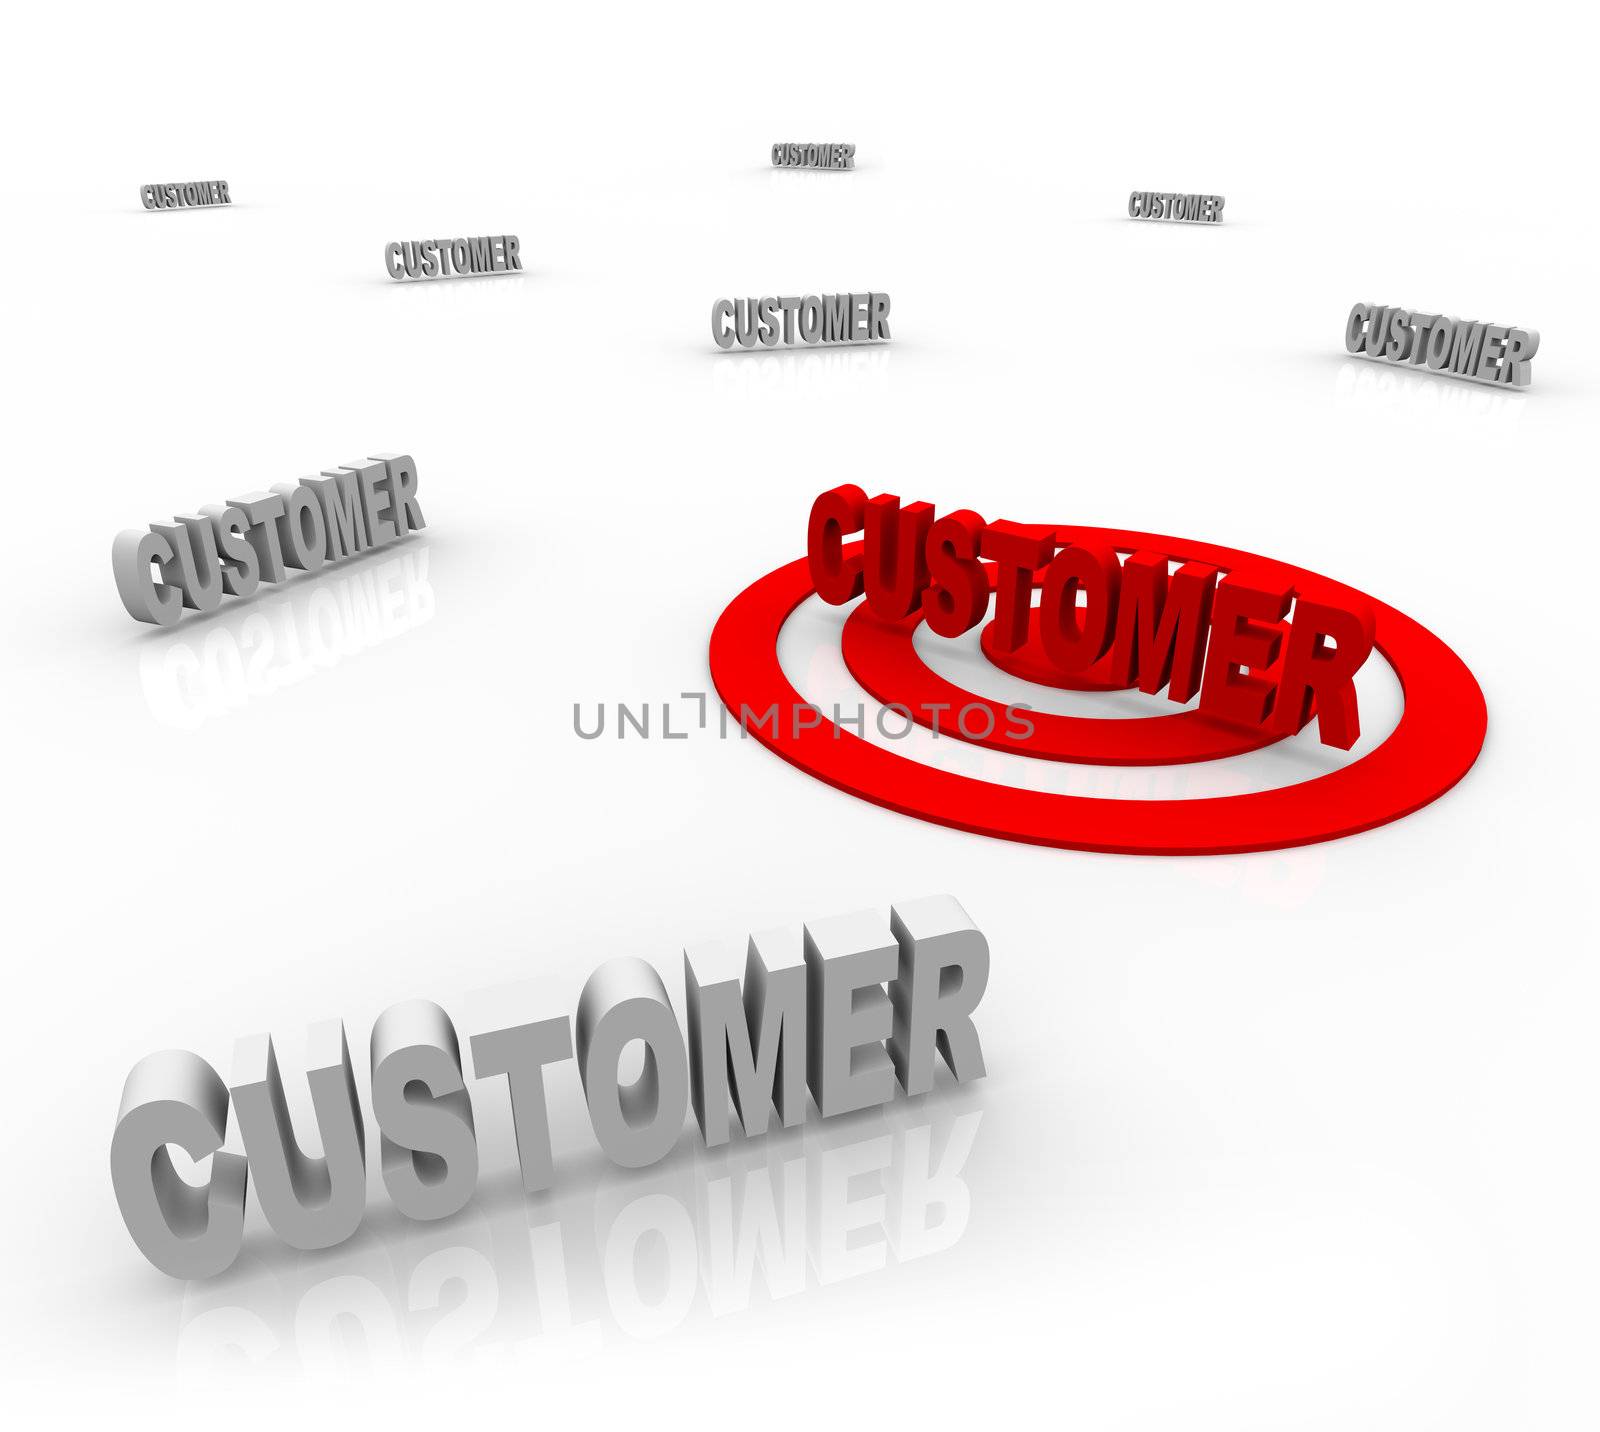 The word Customer is targeted with a bullseye surrounded by other customers, symbolizing target marketing and honing on on a niche market